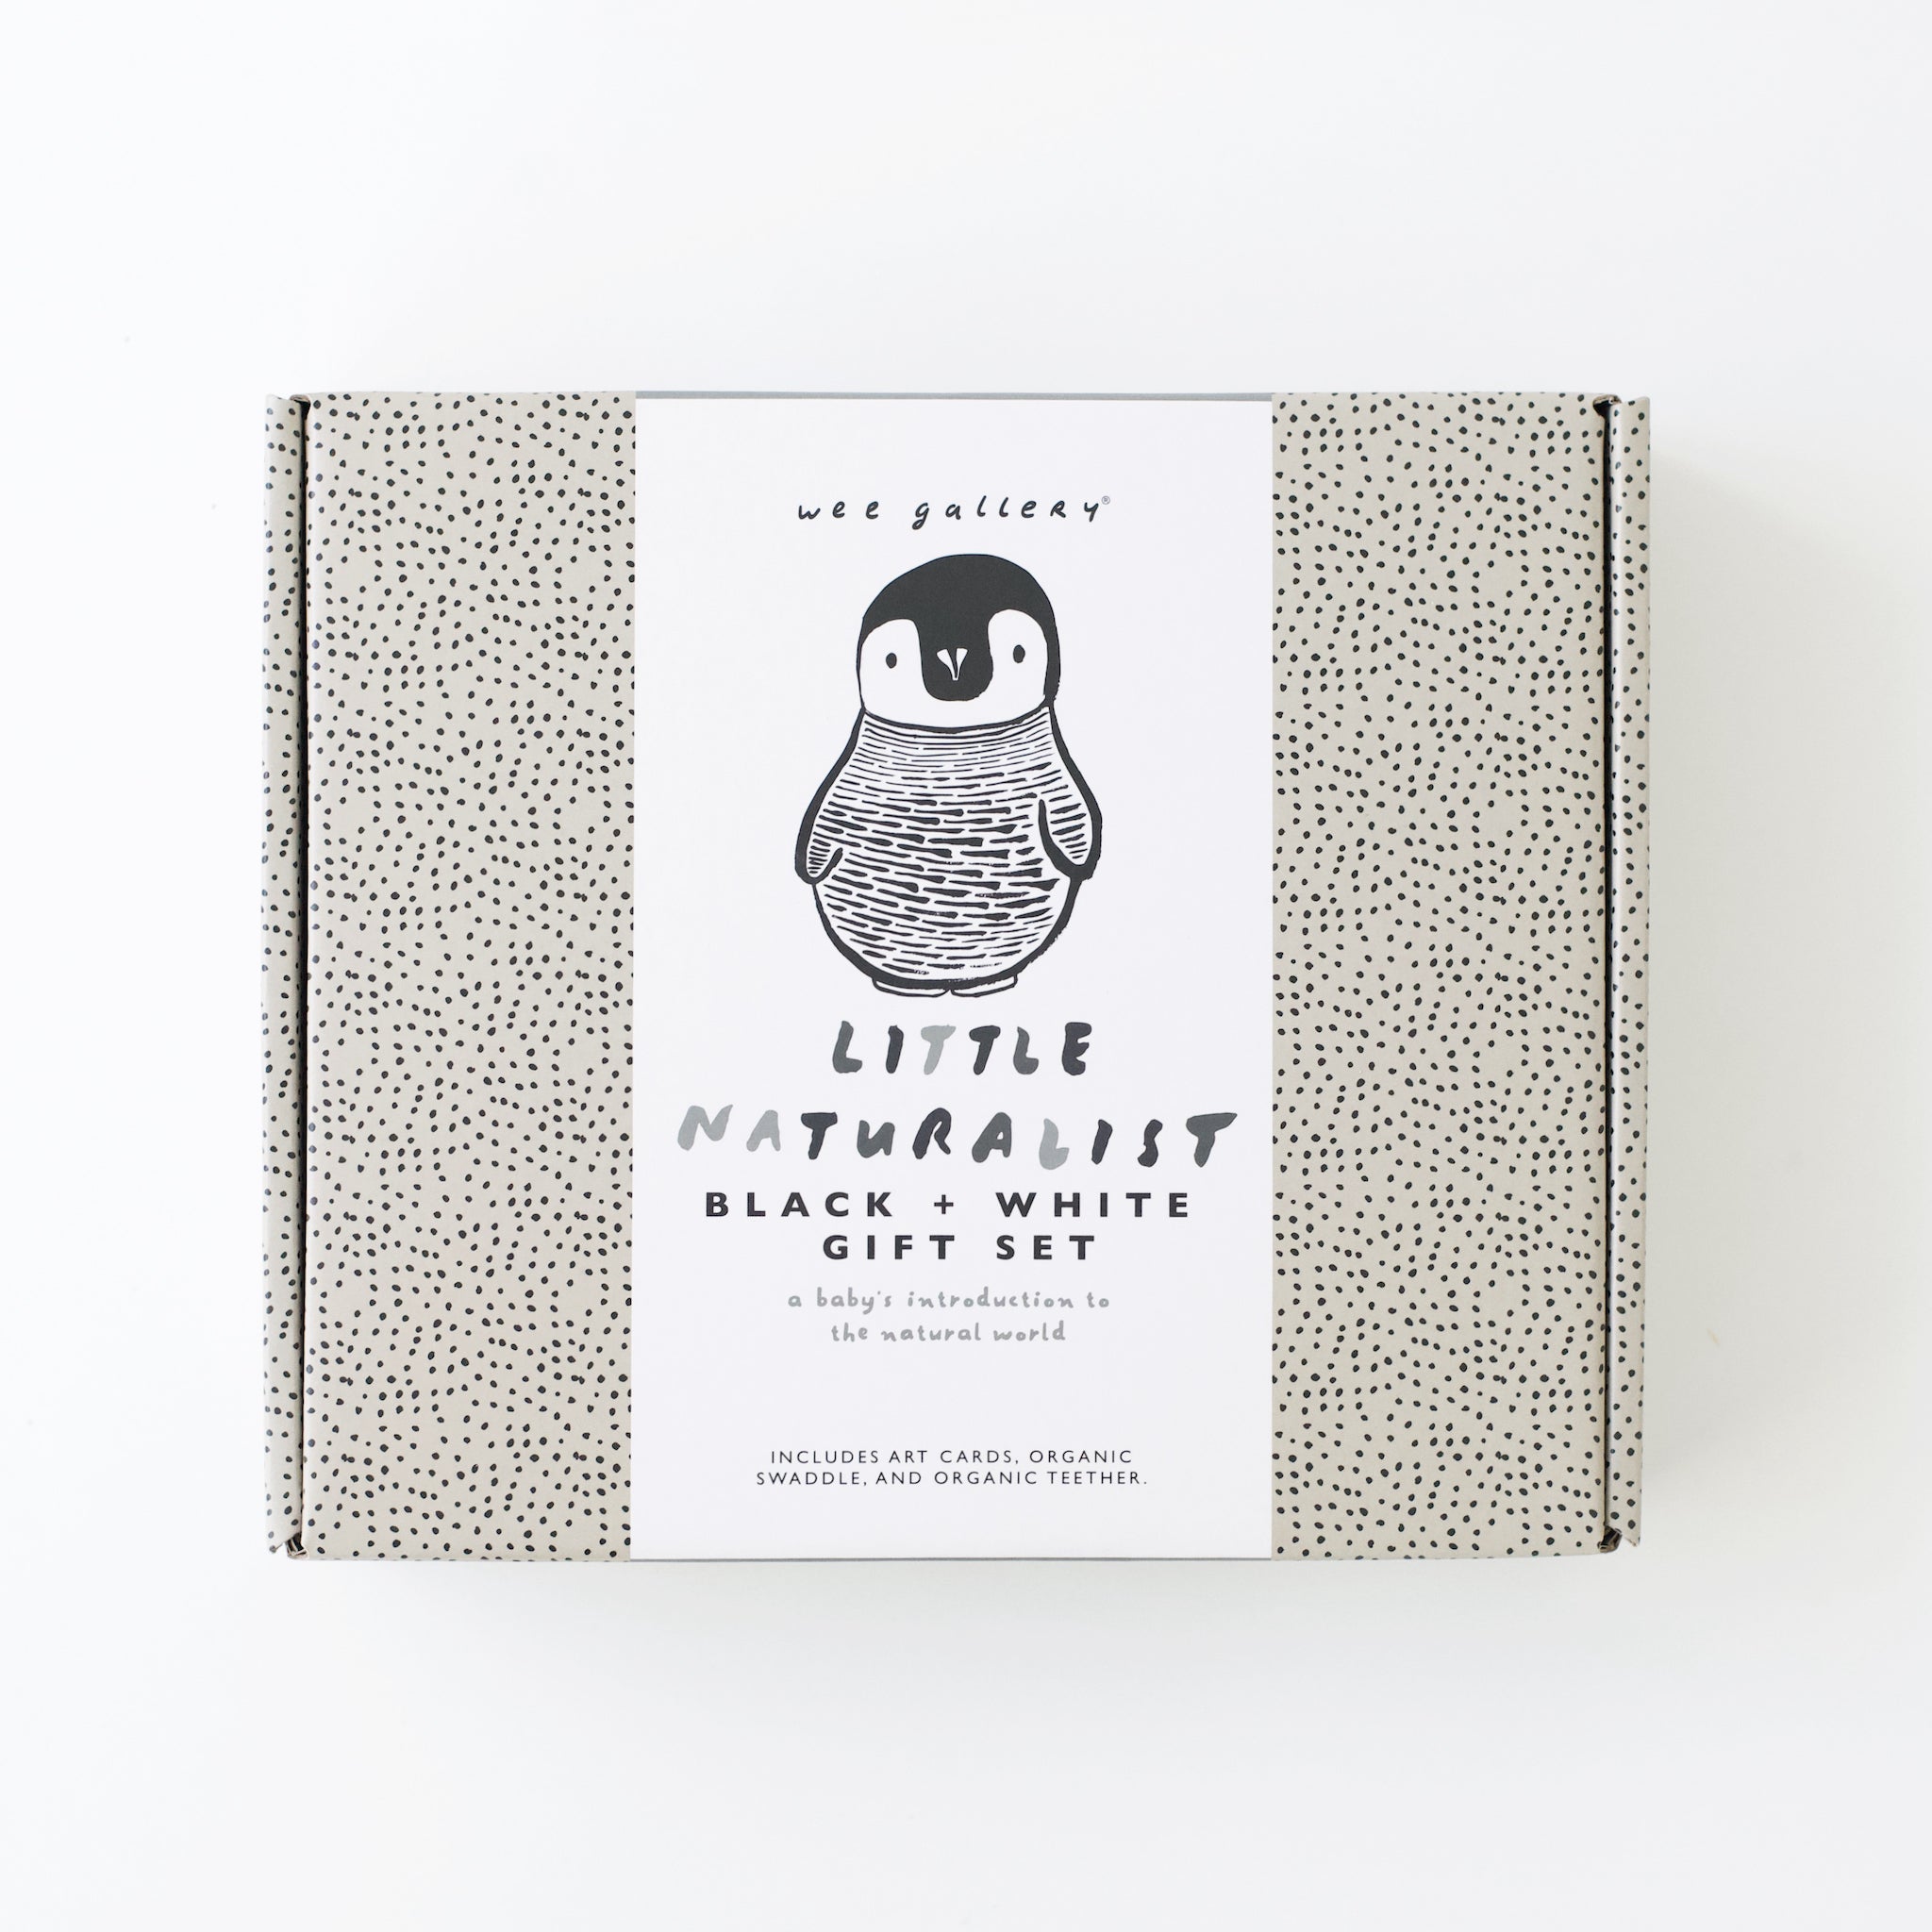 wee-gallery-gift-set-for-newborn-black-and-white-animals-organic-swaddle-teether-contrast-cards-1.jpg